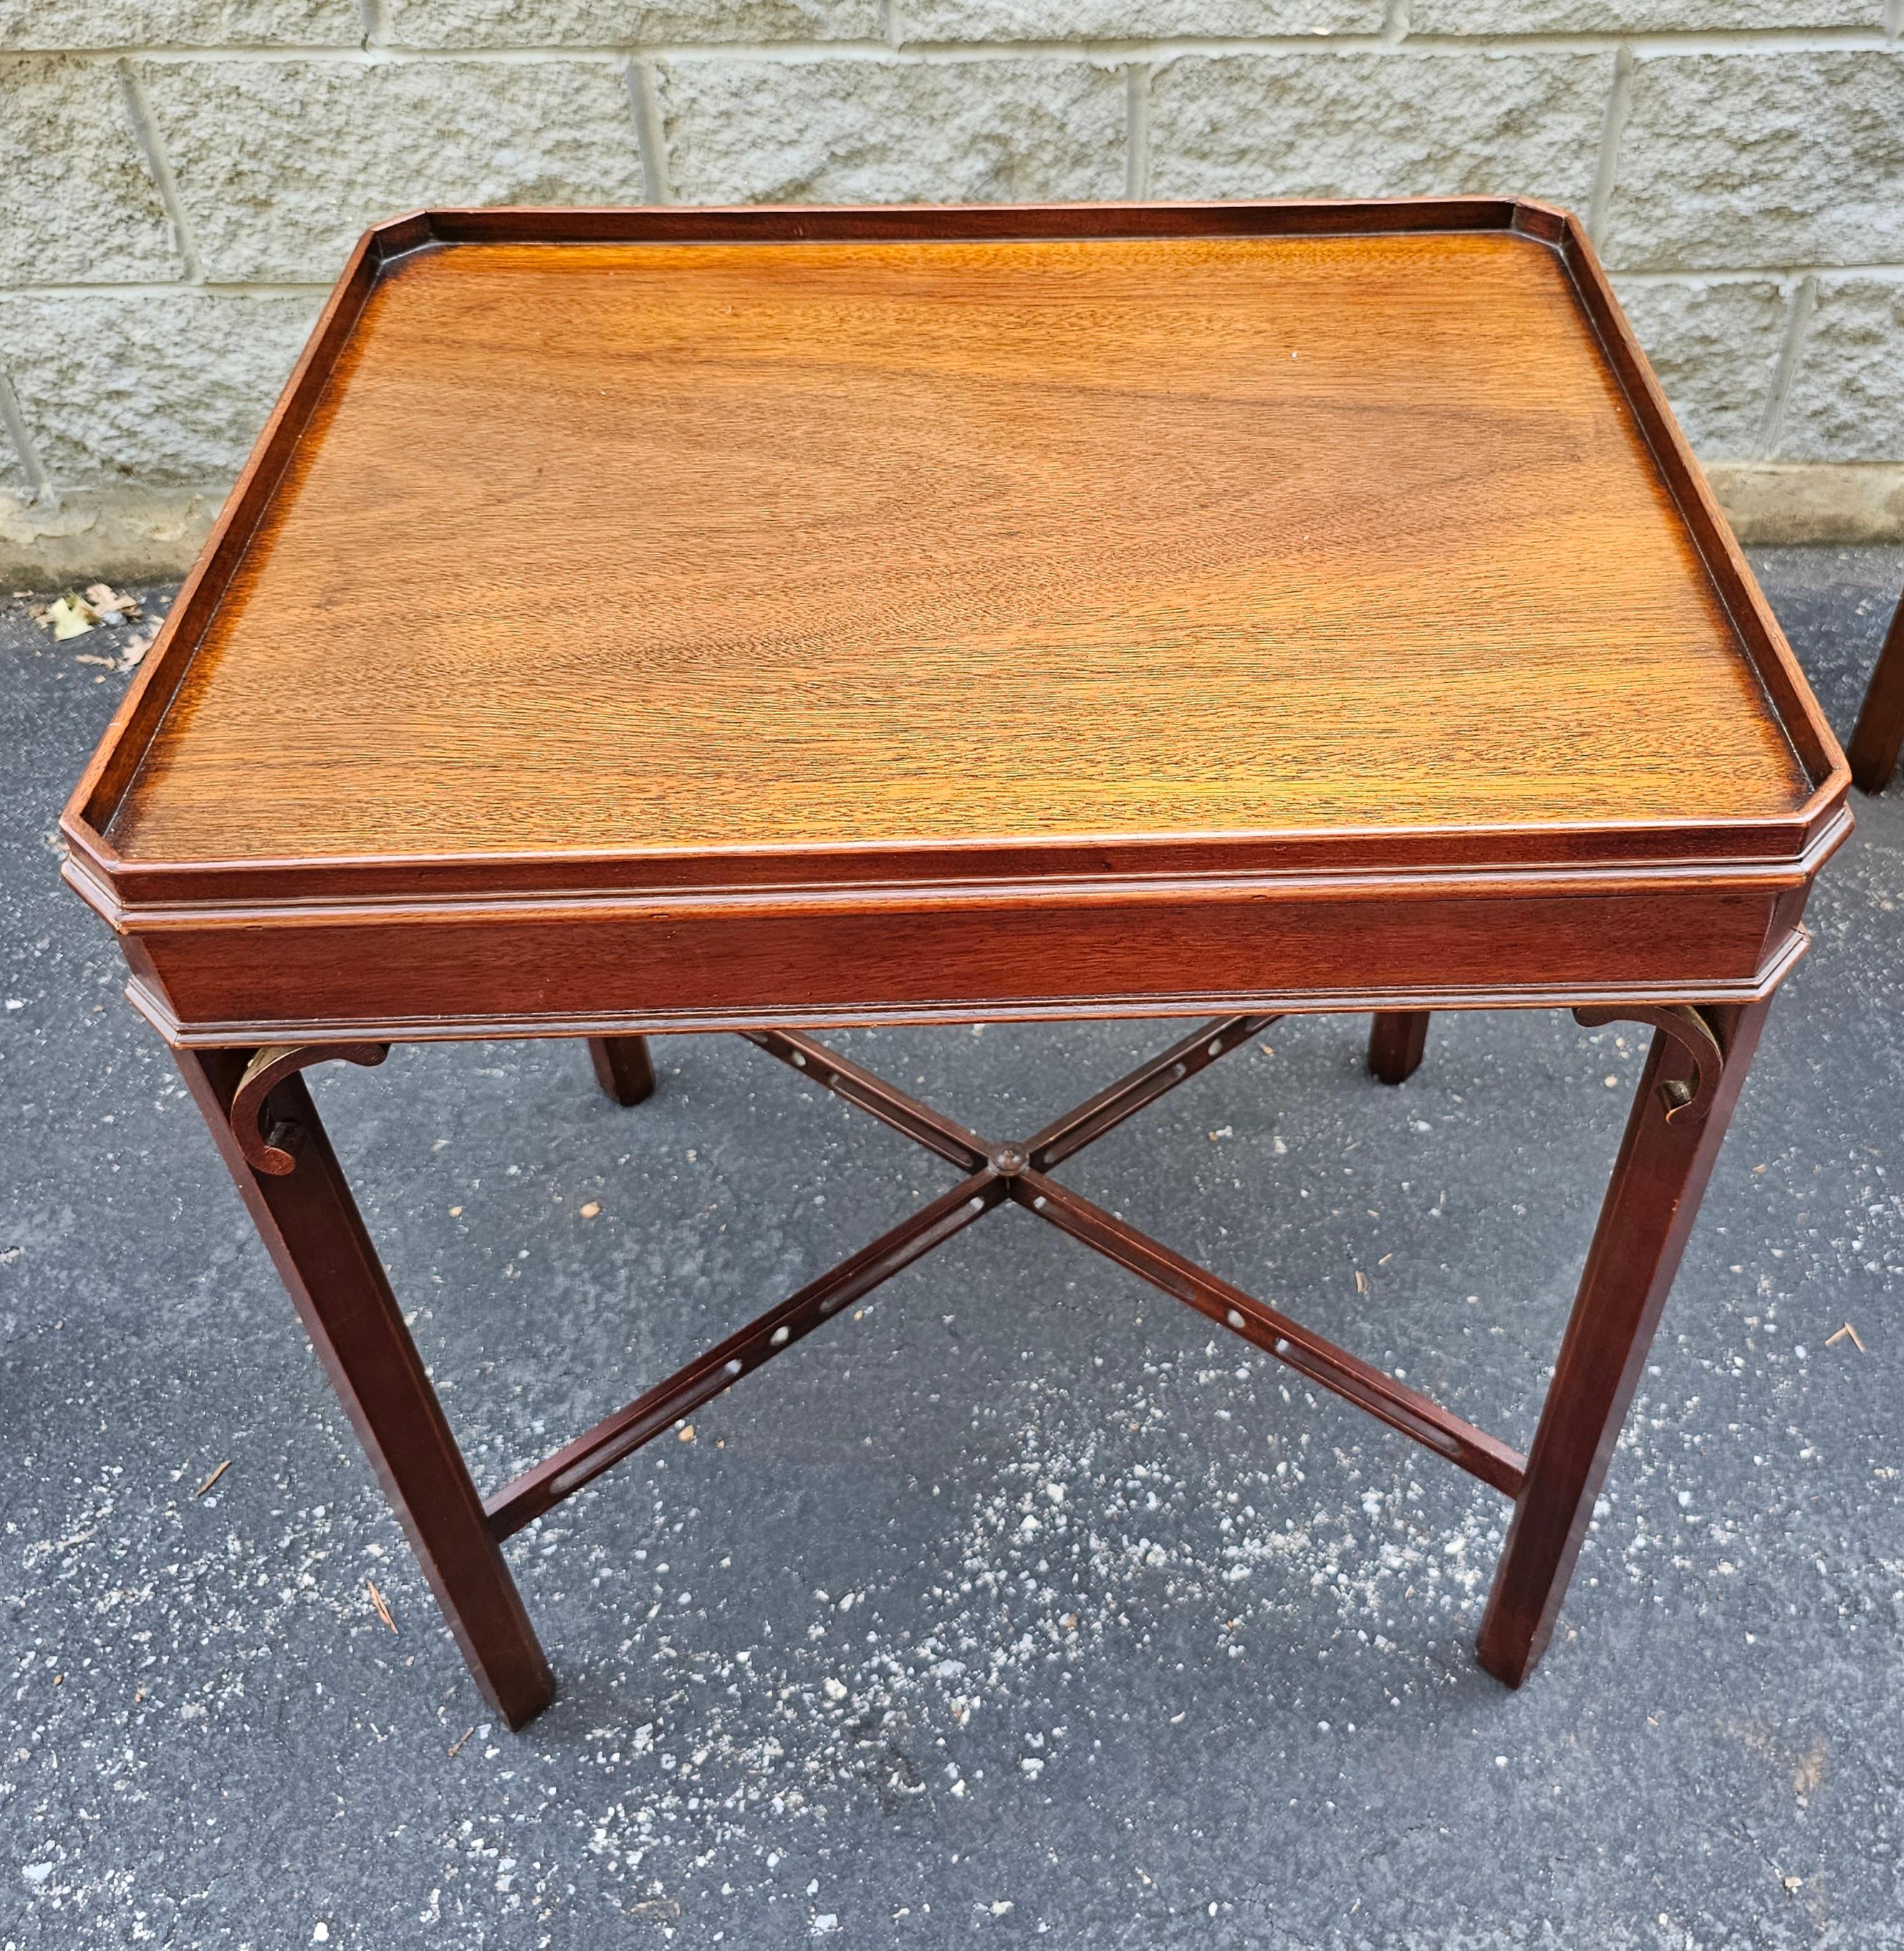 A mid Century Georgian Style Mahogany with Stretcher and galleried side Table in very good vintage condition. Measures 19